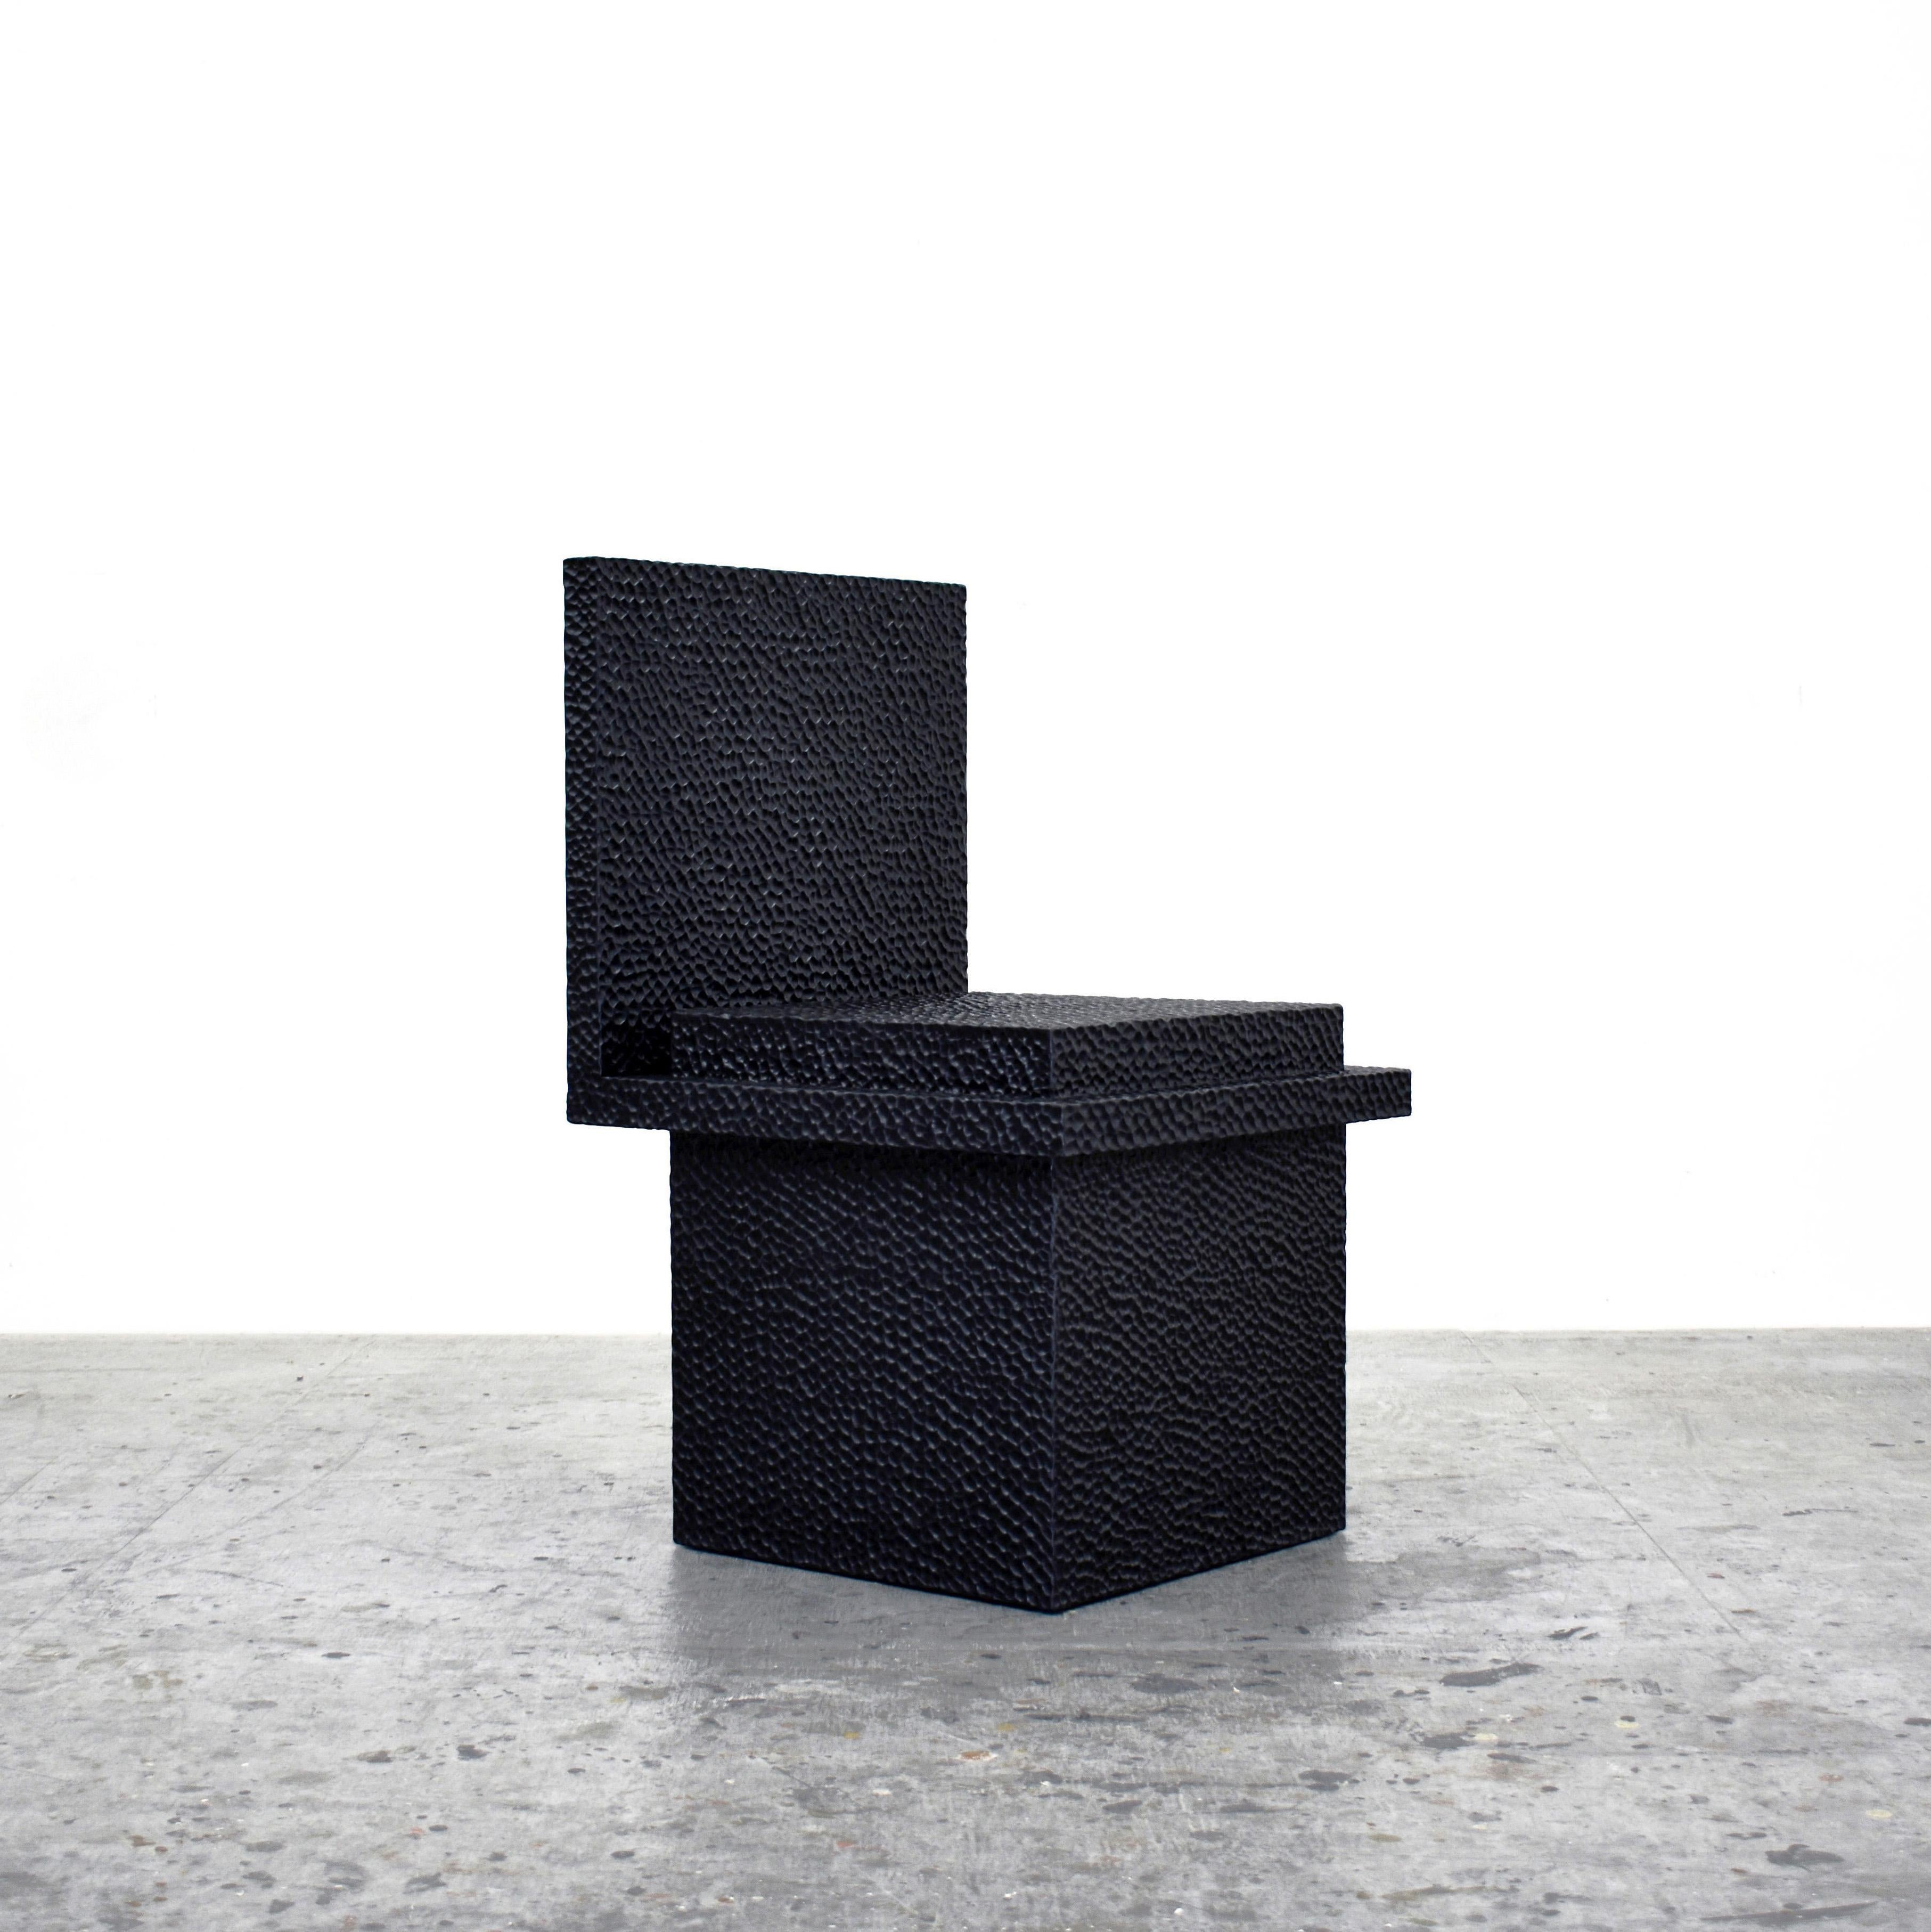 C1 chair by John Eric Byers.
Dimensions: 49.5 x 45.8 x 77.5 cm
Materials: Carved blackened maple

All works are individually handmade to order.

John Eric Byers creates geometrically inspired pieces that are minimal, emotional, and modernly